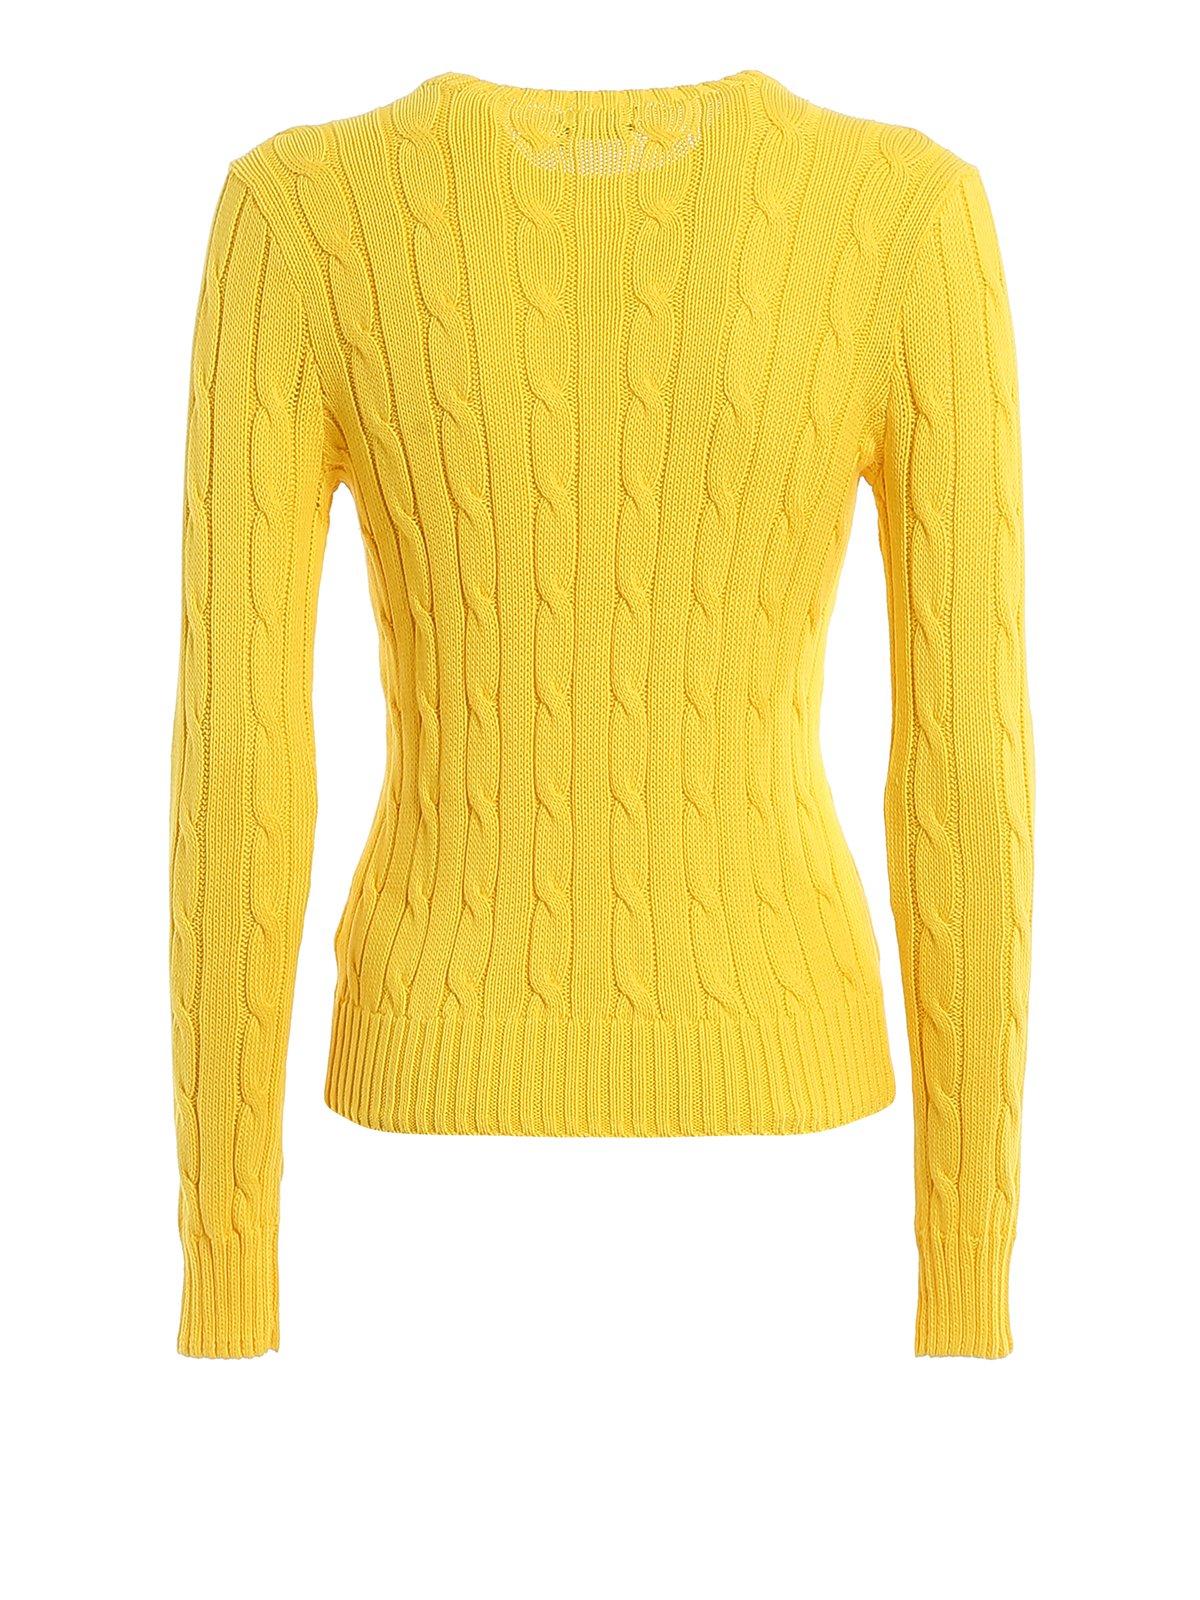 Polo Ralph Lauren Cotton Cable Knit Sweater in Yellow - Lyst